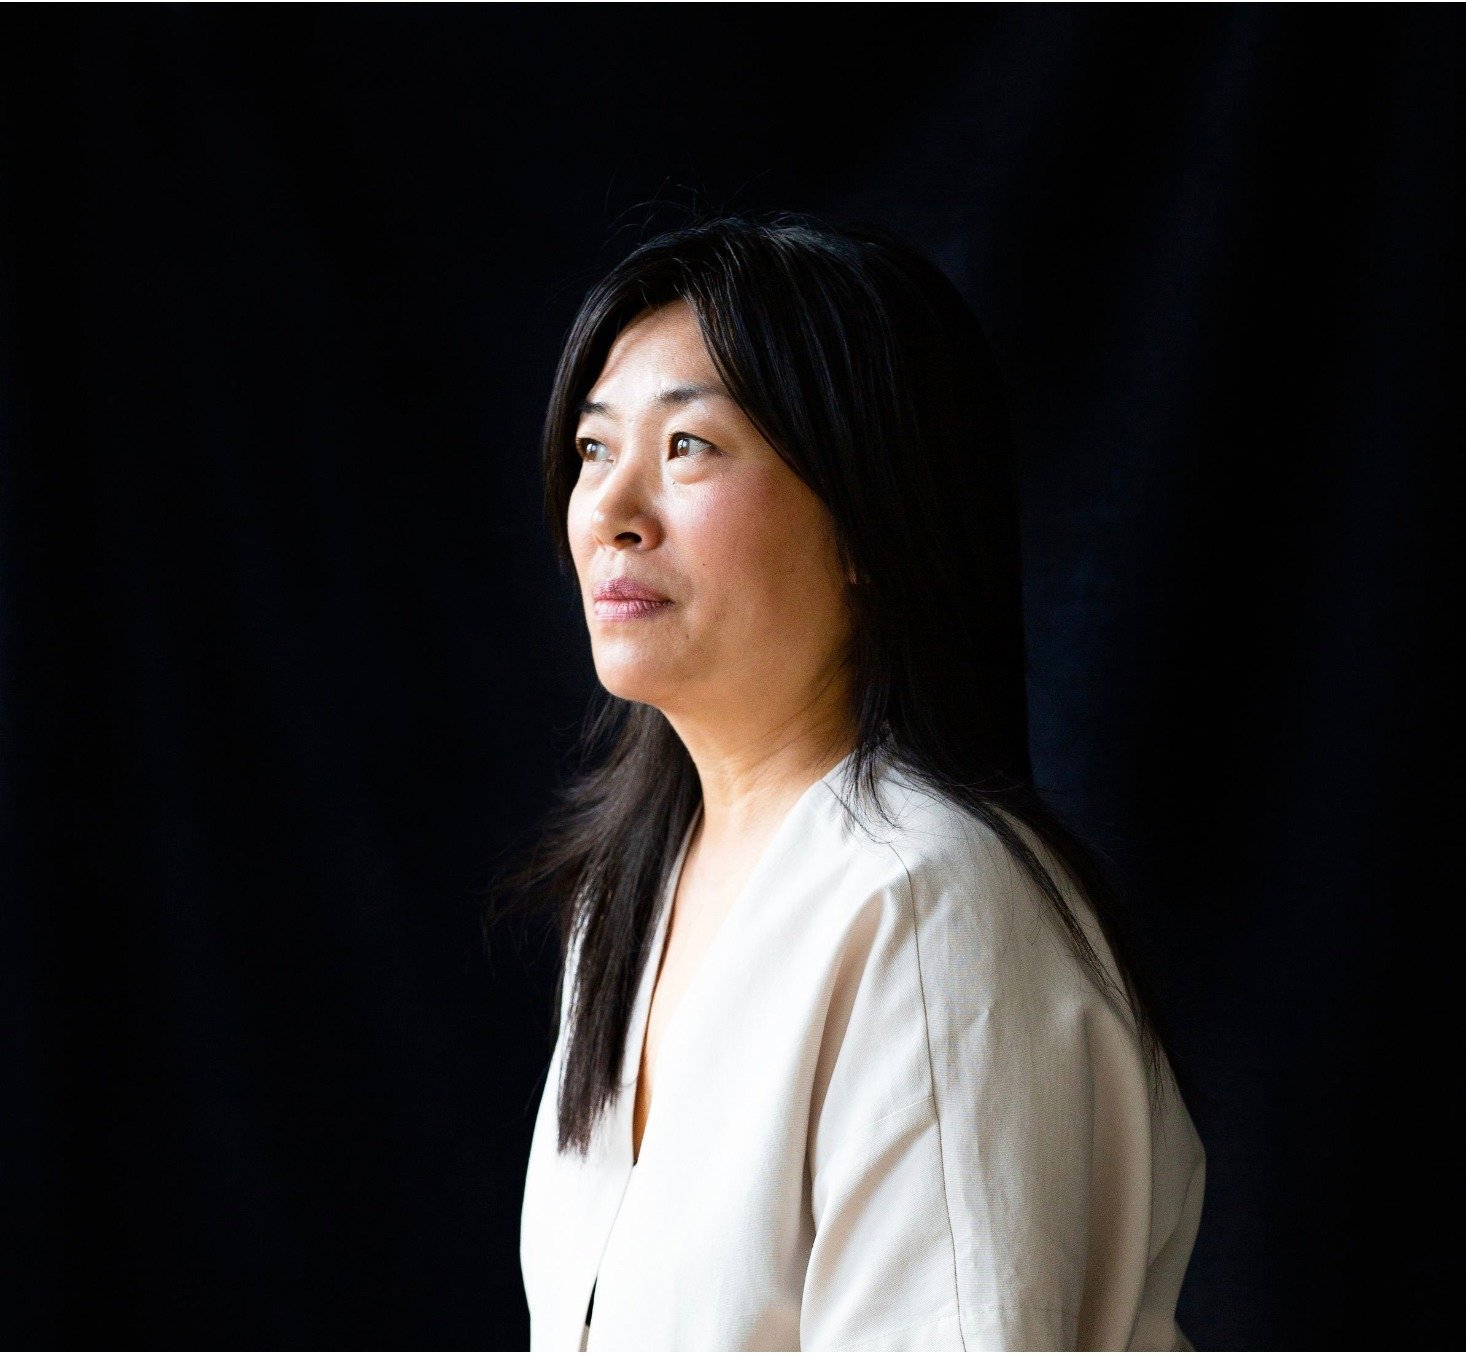 FREE Artist&rsquo;s Talk with Cindy Mochizuki on June 1! 

Join us in our studios for an engaging talk with exhibiting artist Cindy Mochizuki. Curious to learn more about Ancestral Dreams &amp; Other Premonitions, and Mochizuki&rsquo;s process of mem